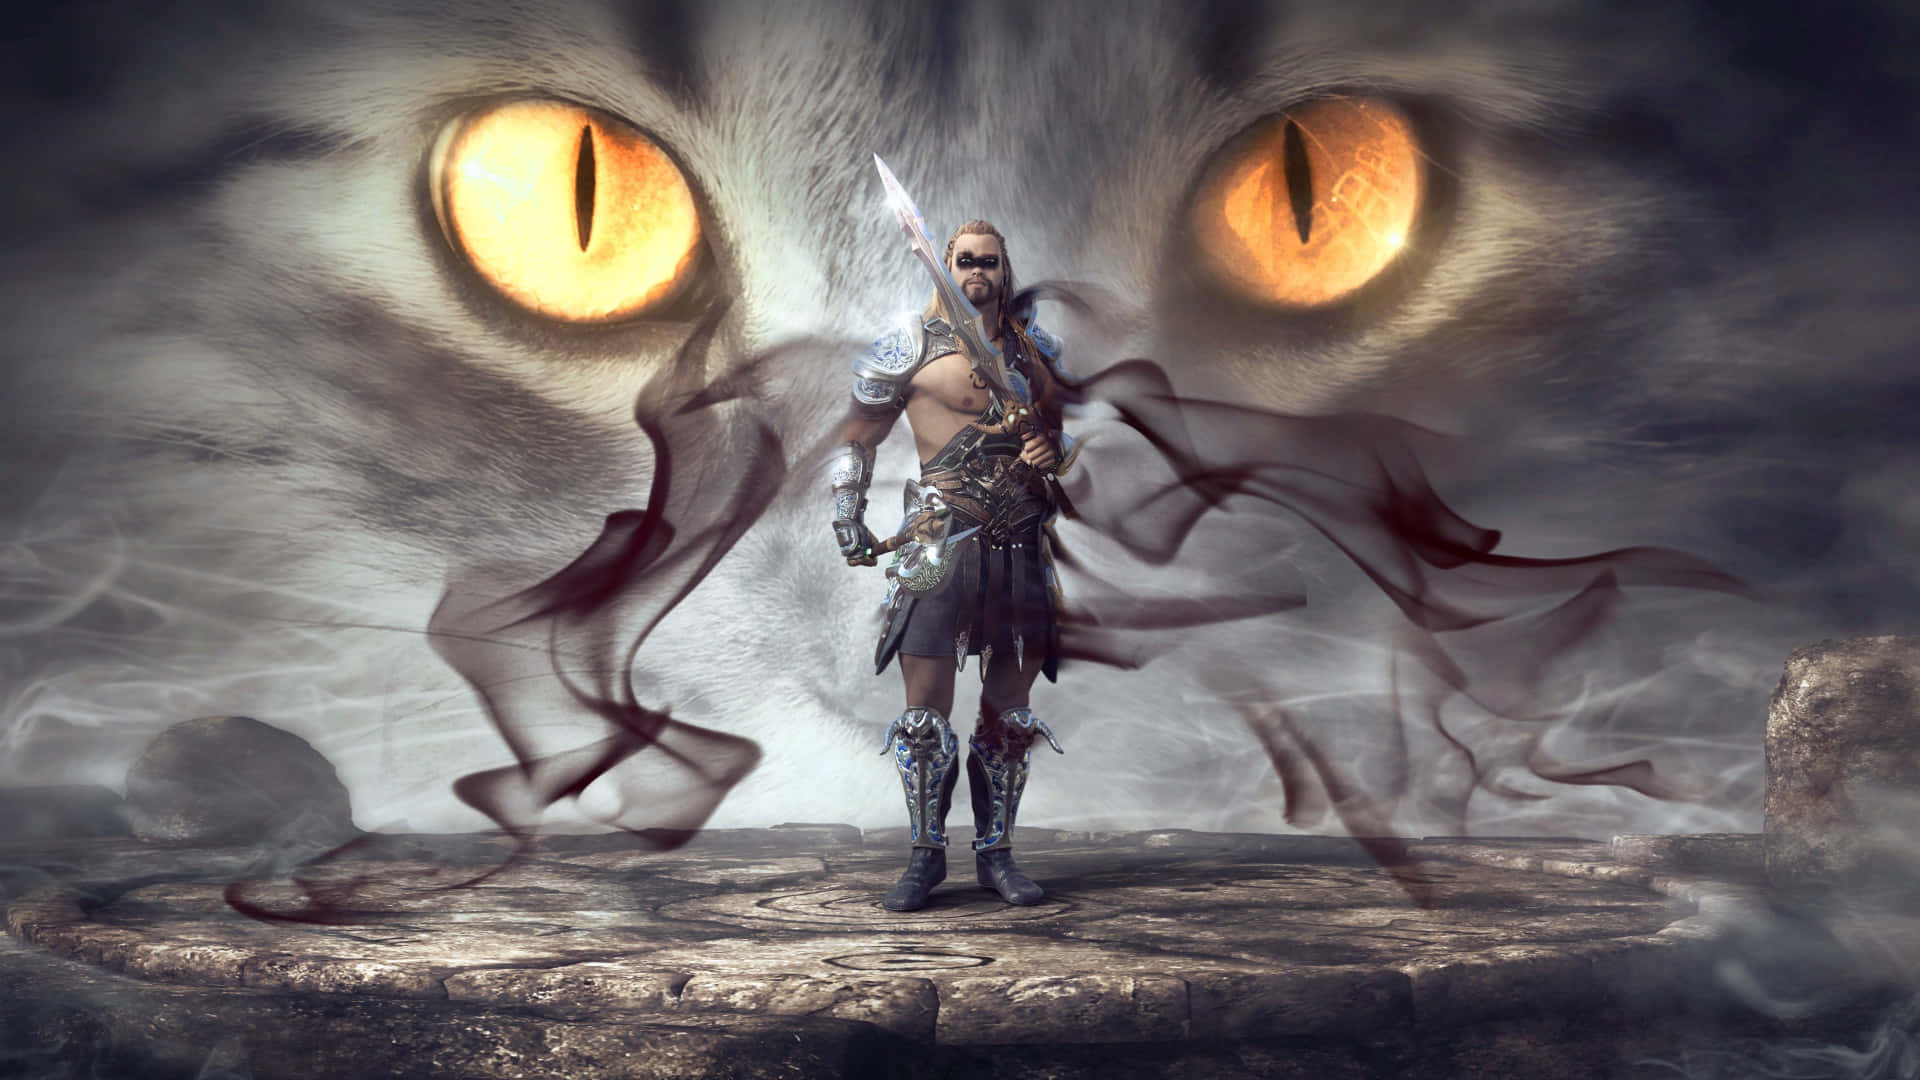 A Man With A Sword And A Cat In The Background Wallpaper